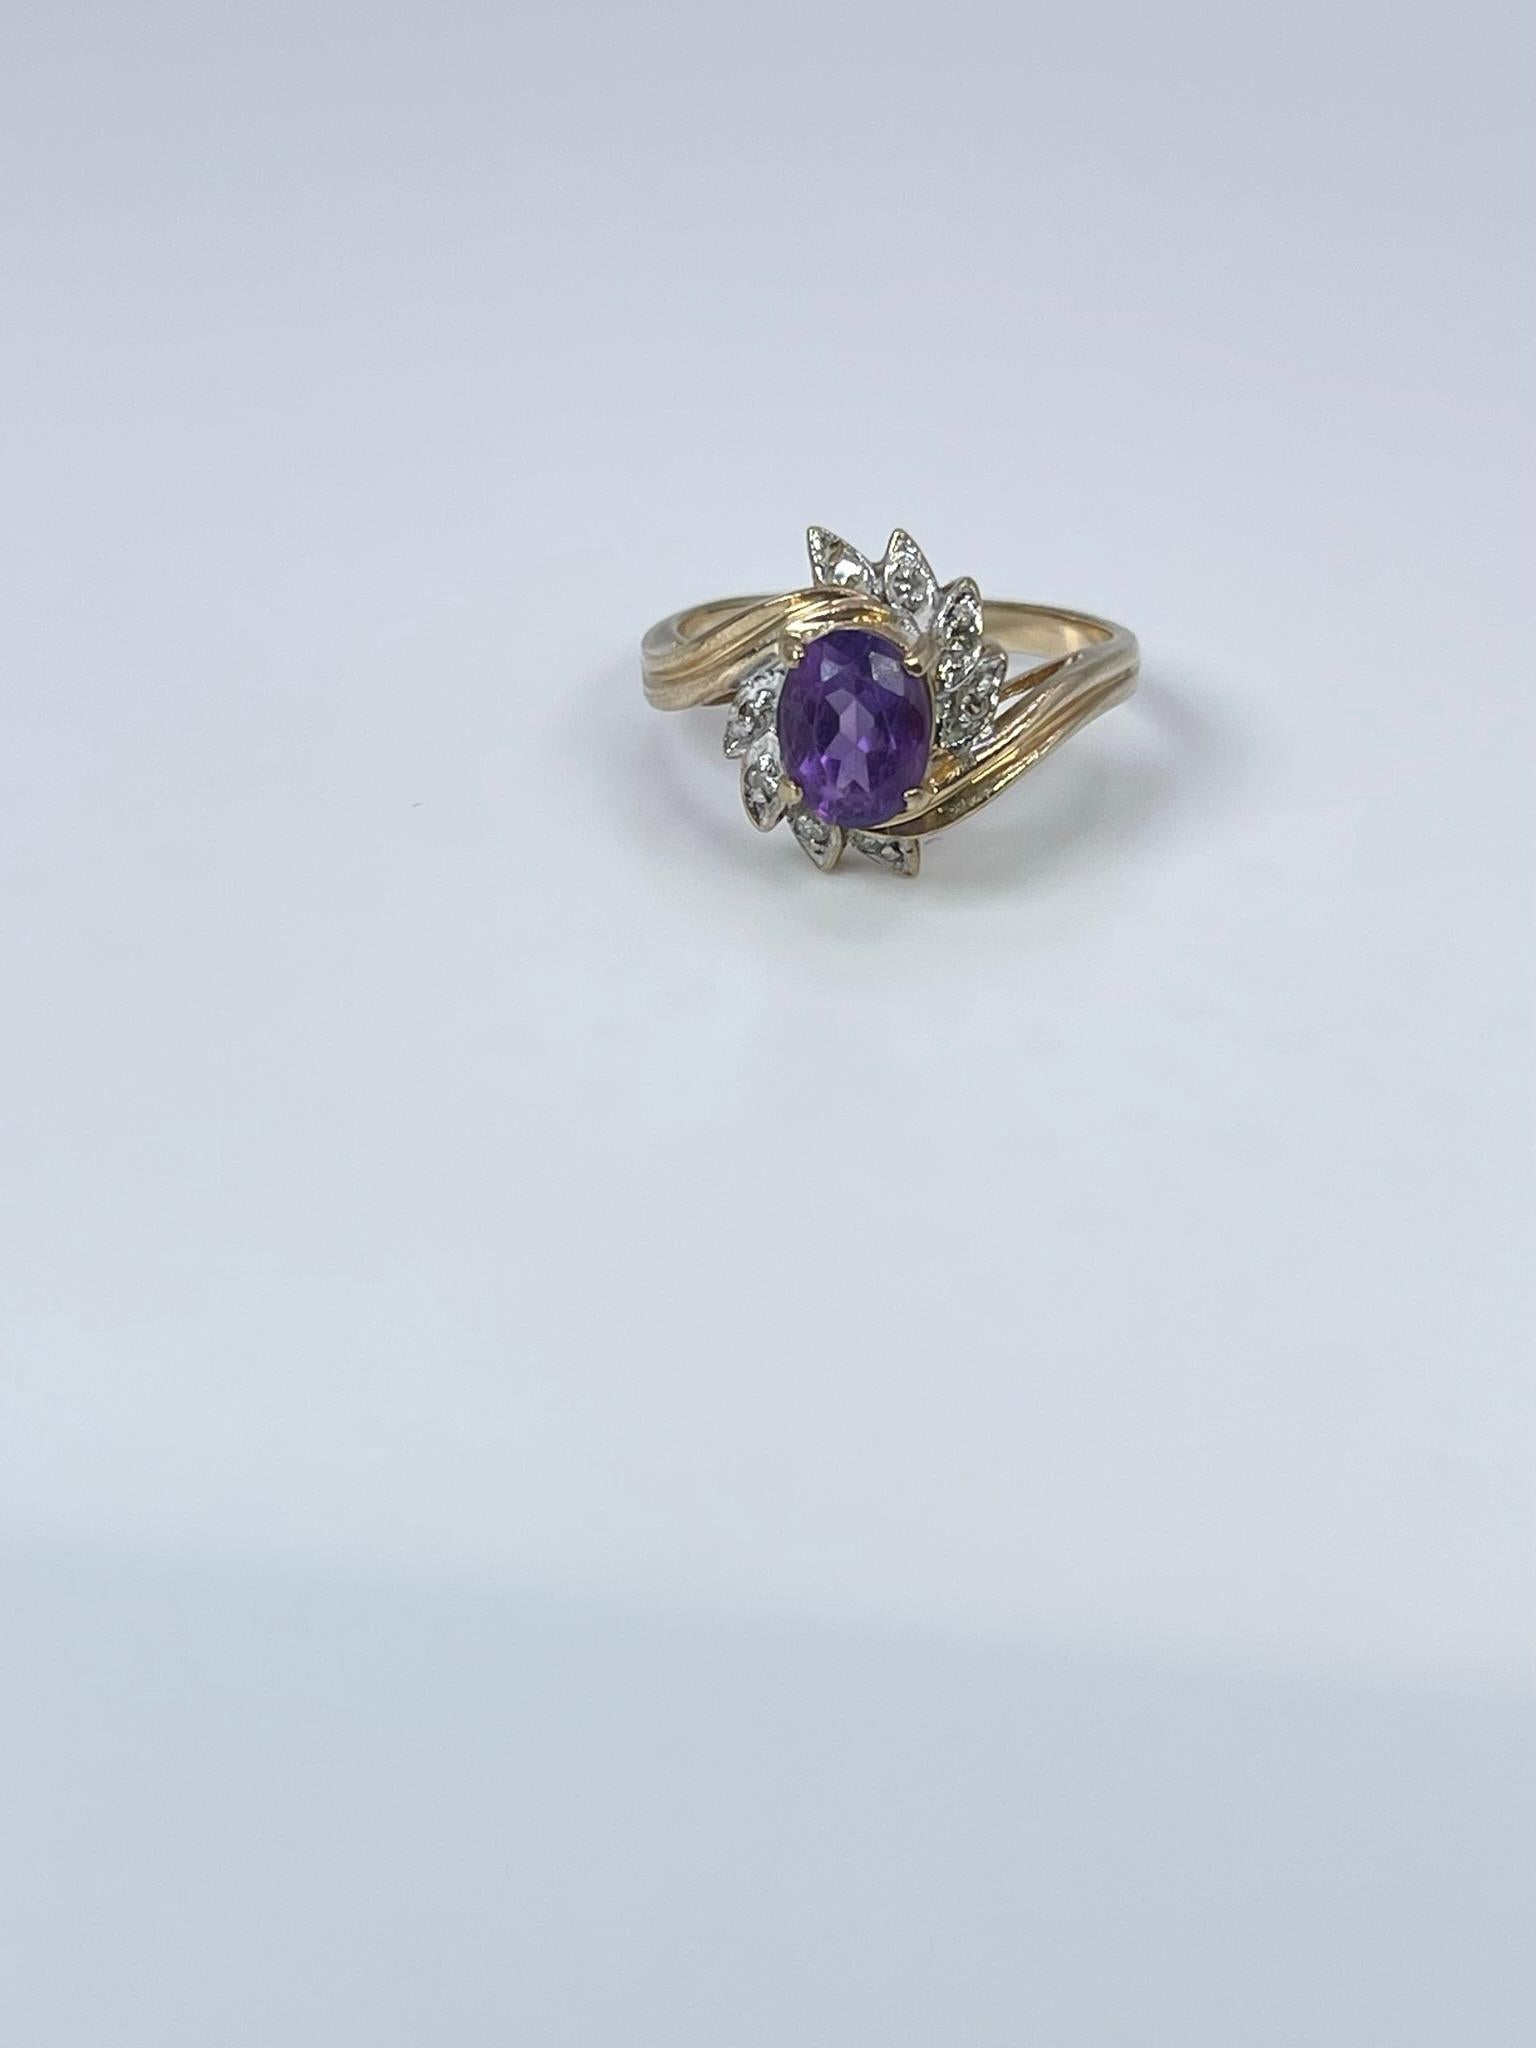 Amethyst & Diamond ring in 10KT yellow gold. Stunning cocktail ring, estate.

GRAM WEIGHT: 4.23gr
METAL: 10KT yellow gold

NATURAL DIAMOND(S)
Cut: Round
Color: G-H 
Clarity: SI (average)
Carat: 0.05ct

NATURAL AMETHYST
Cut: Oval
Color: Light